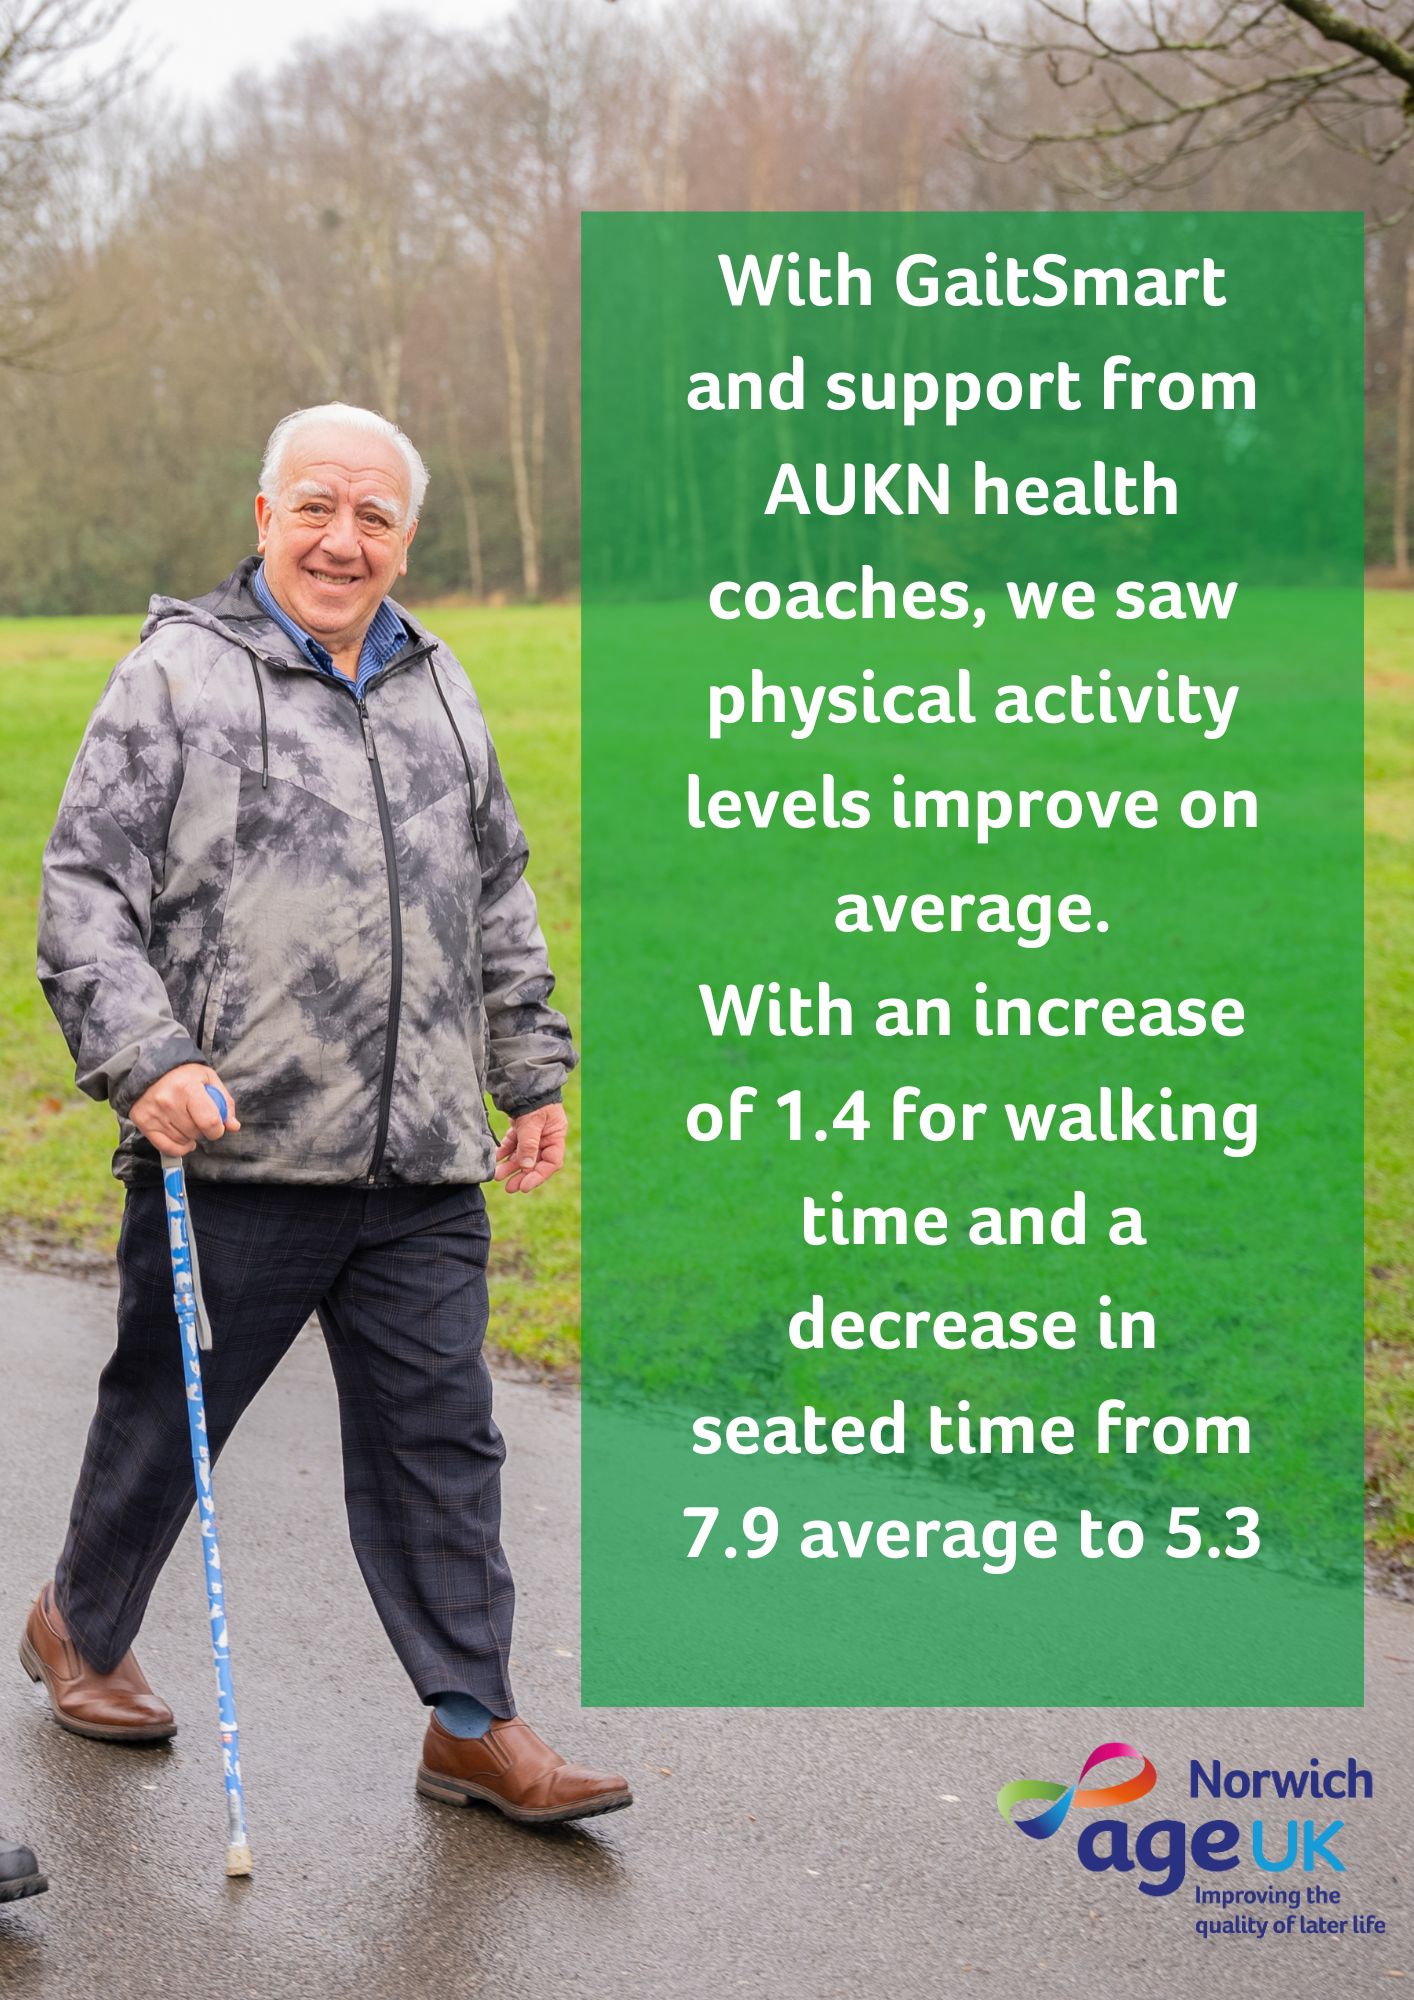 Image is of a man walking outside, text reads: With GaitSmart and support from AUKN health coaches, we saw physical activity levels improve improve on average.  With an increase of 1.4 for walking time and a decrease in seated time from 7.9 average to 5.3 